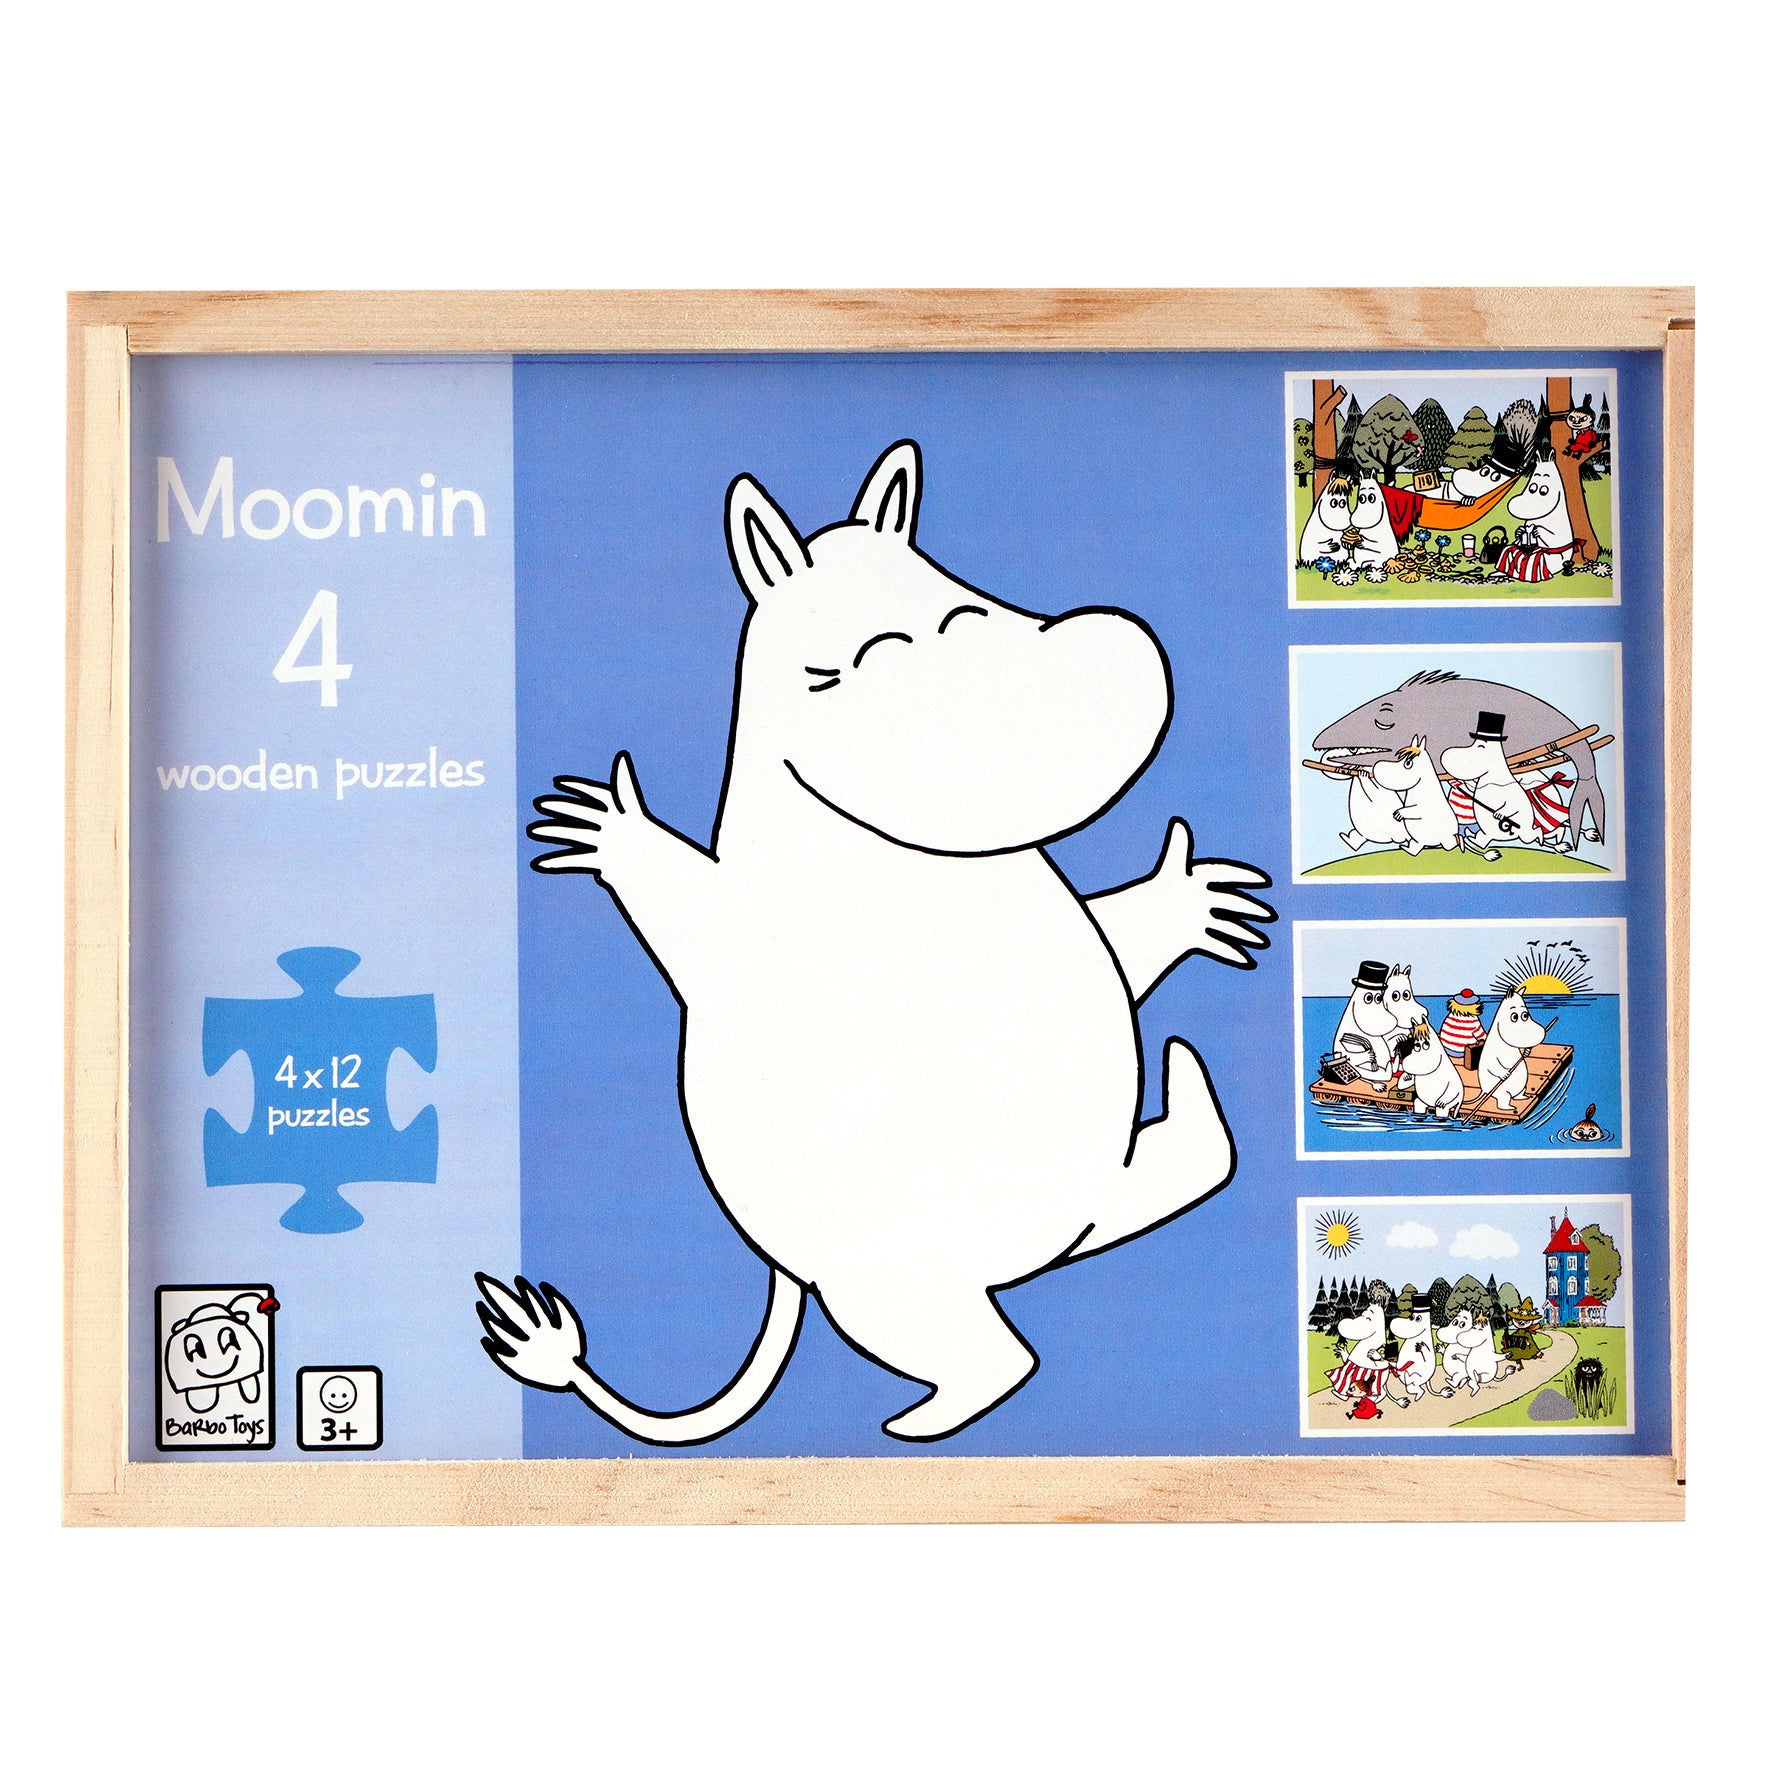 moomin 4 wooden puzzle game box